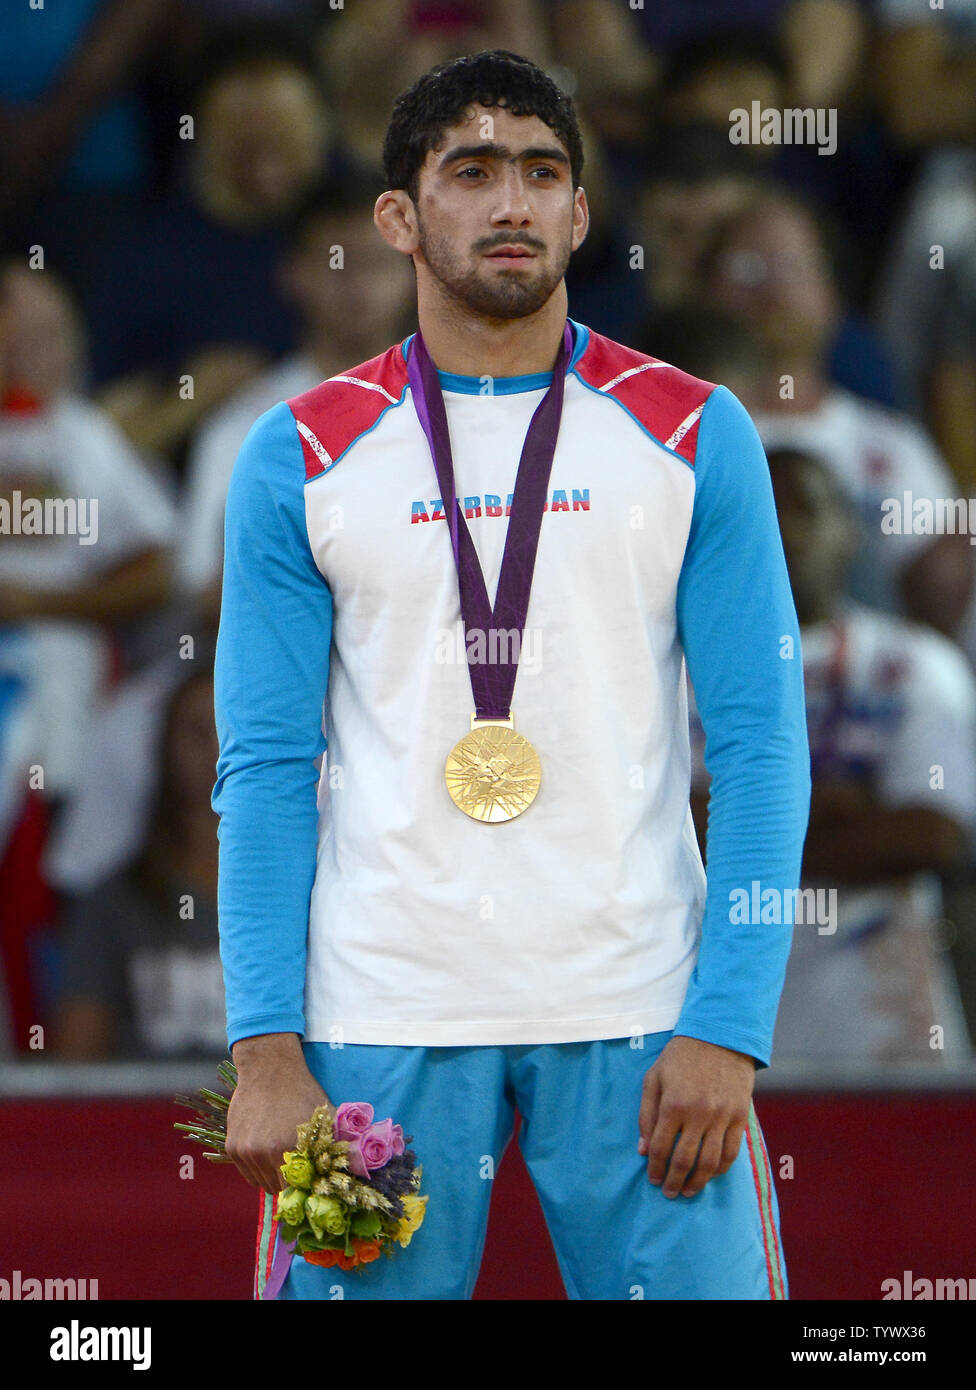 Toghrul Asgarov of Azerbaijan listens to his country's national anthem after winning the Gold Medal in the Men's 60kg Freestyle Wrestling at the London 2012 Summer Olympics on August 10, 2012 in London.   UPI/Ron Sachs Stock Photo